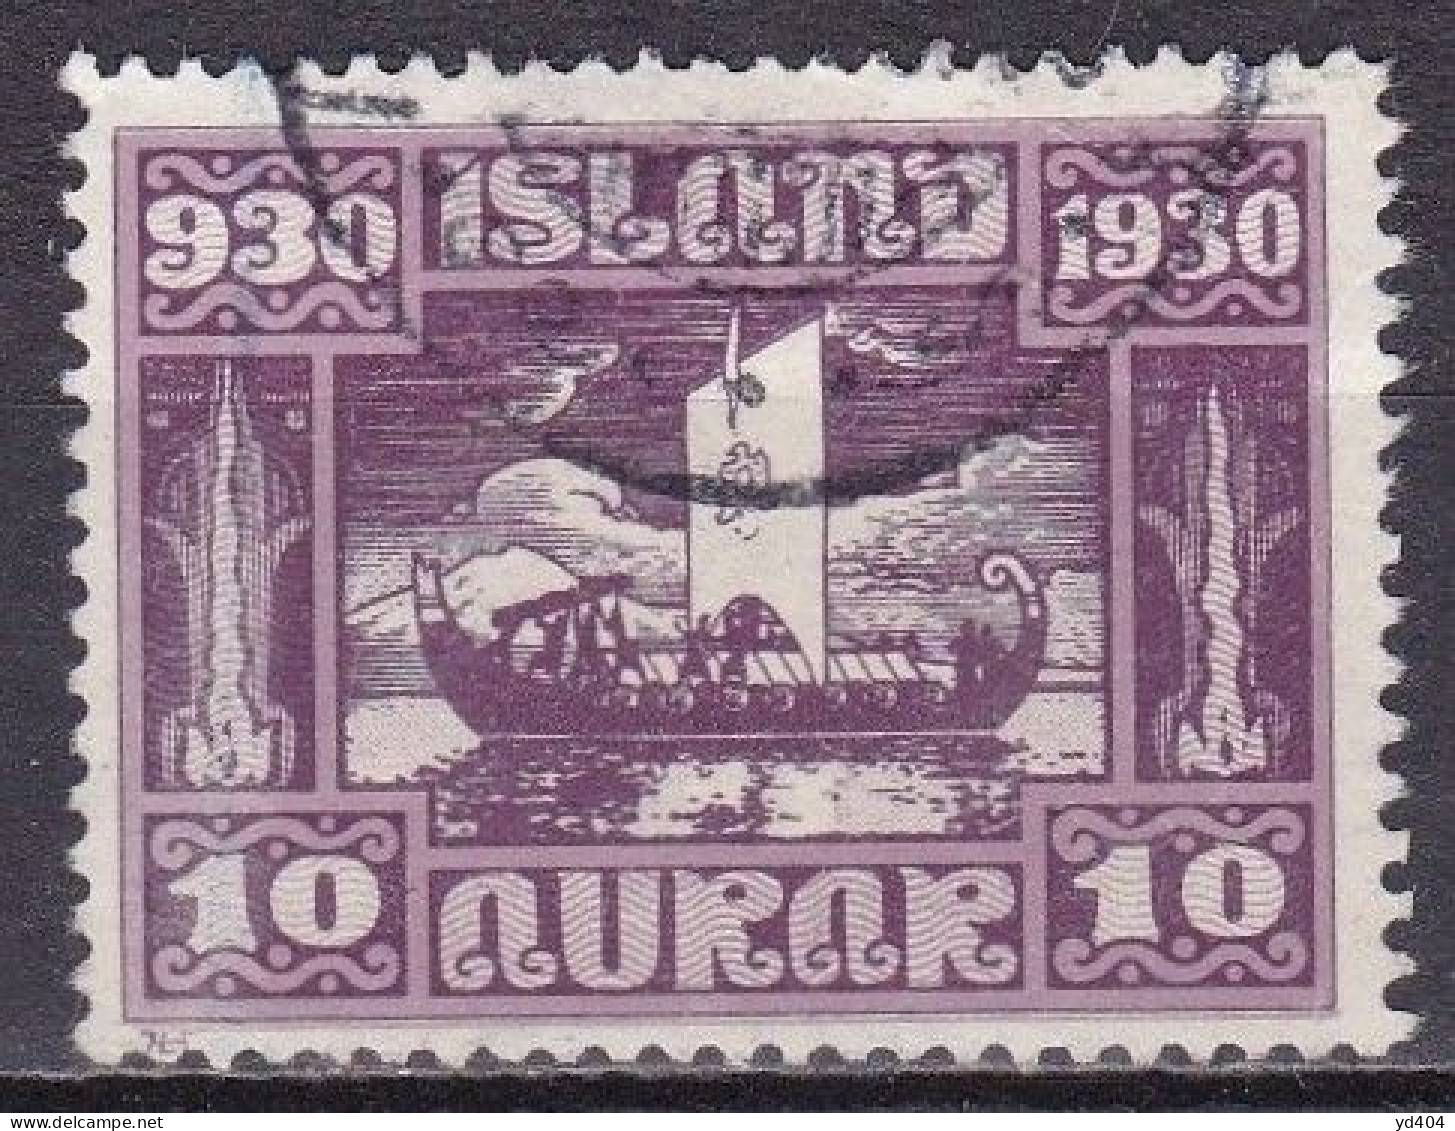 IS020D – ISLANDE – ICELAND – 1930 – MILLENARY OF THE ALTHING – SG # 161 USED 20 € - Usati